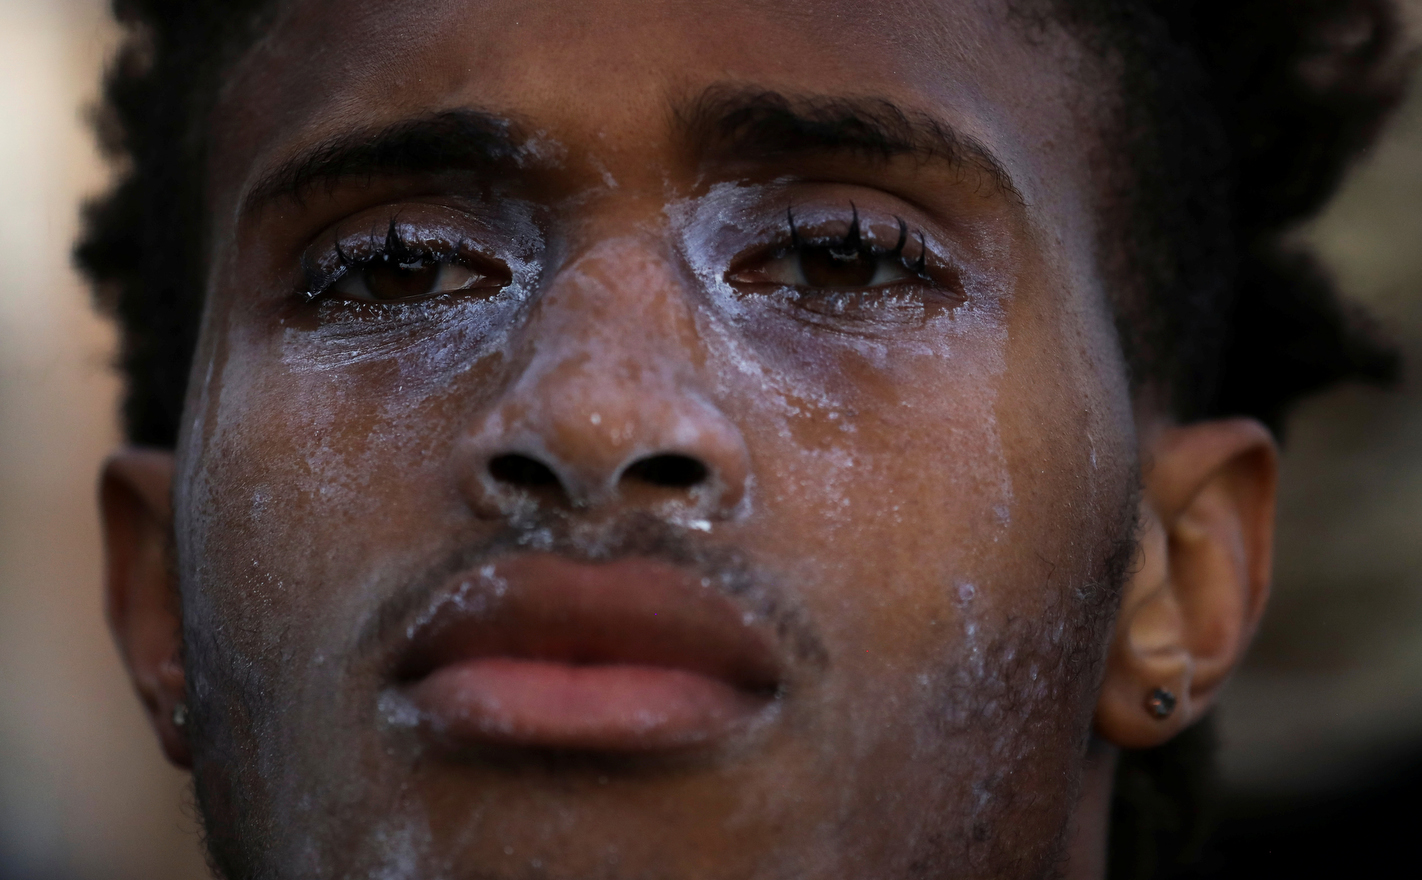 A young man with dried eye wash on his face used to treat tear gas stares at a line of police after a day of protest calling for justice for George Floyd was suddenly broken up by a semi-truck nearly running through a crowd of demonstrators in Minneapolis, Minnesota, U.S. May 31, 2020. Police moved into the agitated crowd and eventually used chemical irritants to disperse them.